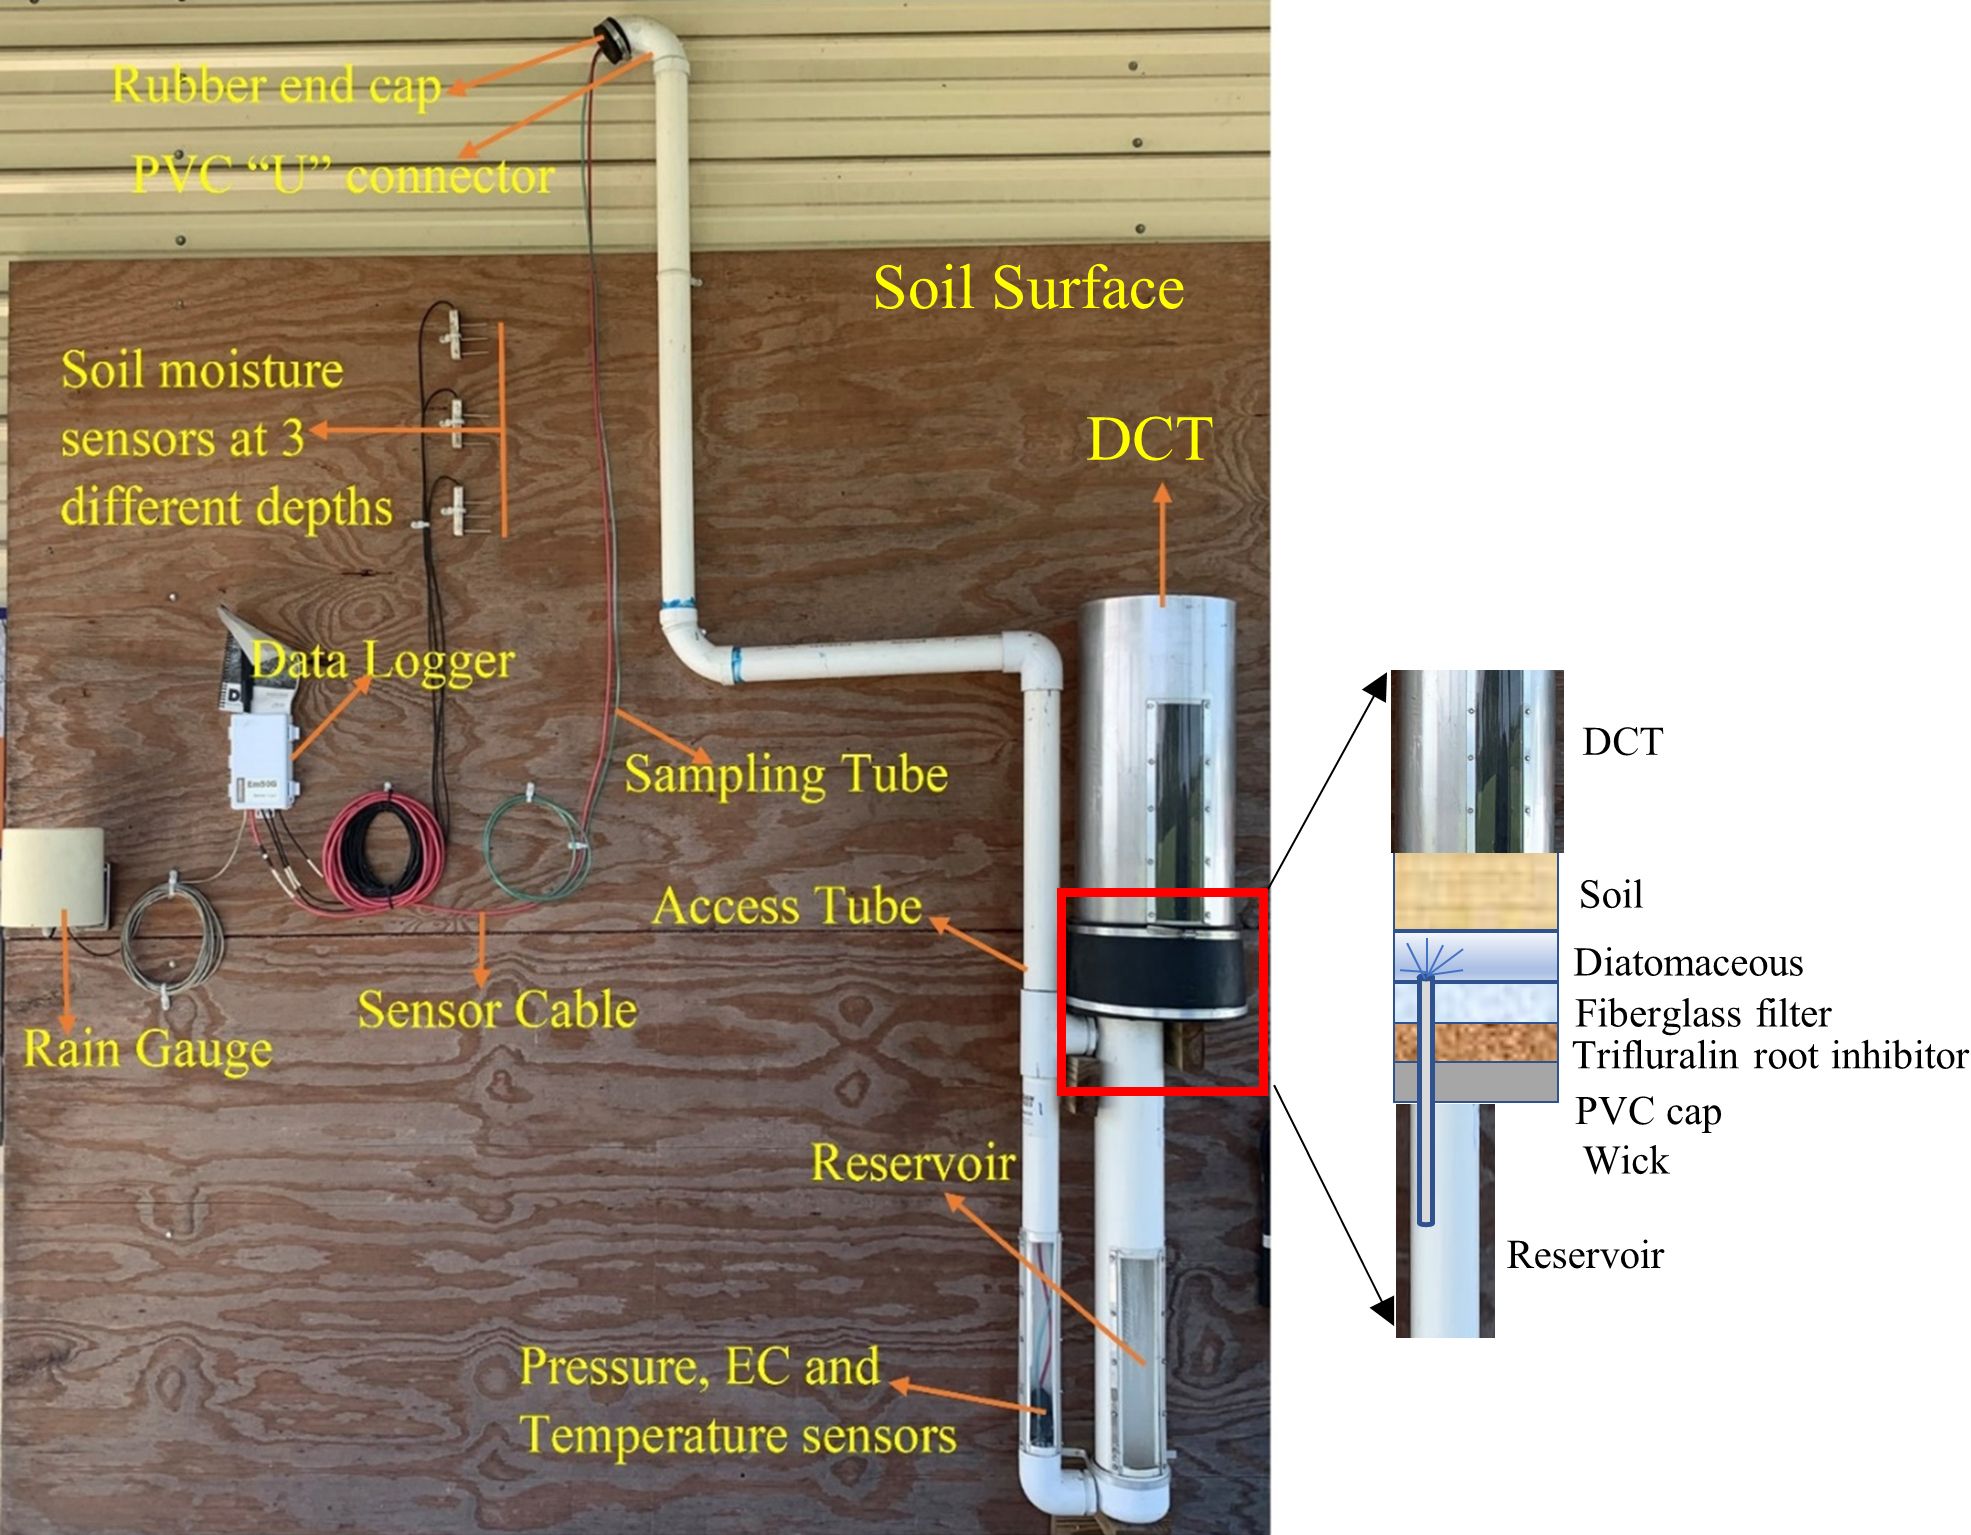 Schematic of drainage lysimeter showing different components. The red box represents the different components of the DCT and wick assembly union. 